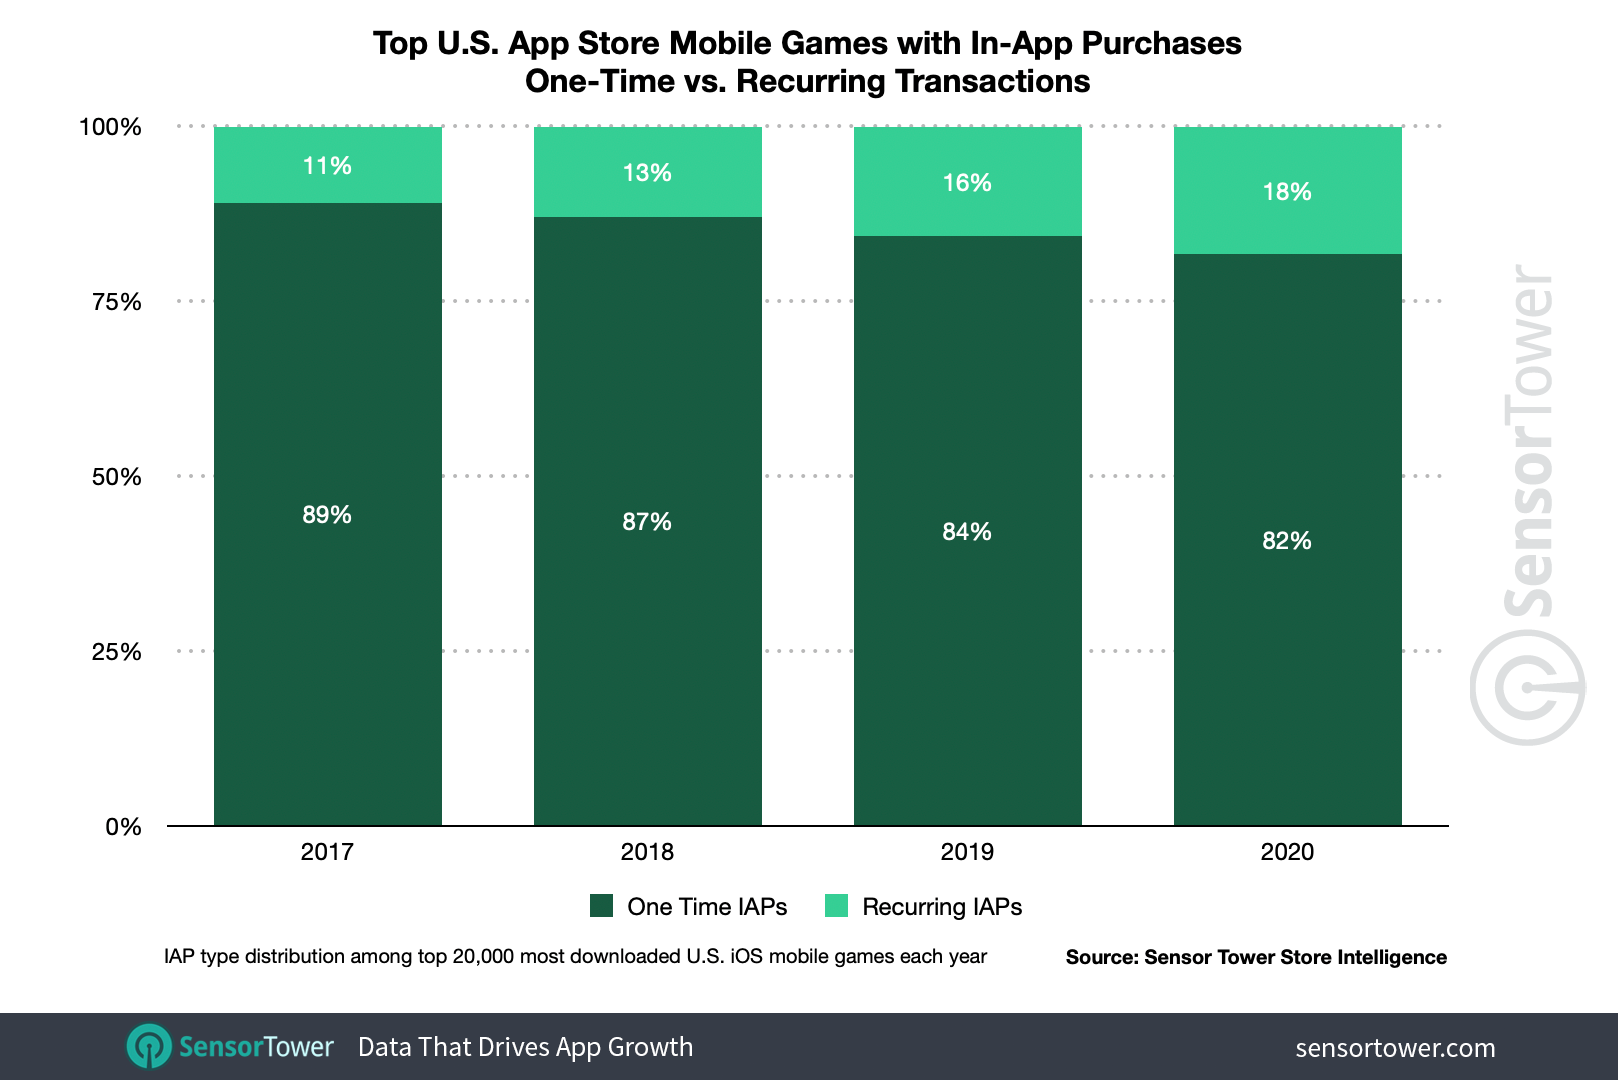 Subscriptions in the top U.S. App Store mobile games with in-app purchases grew to 18 percent